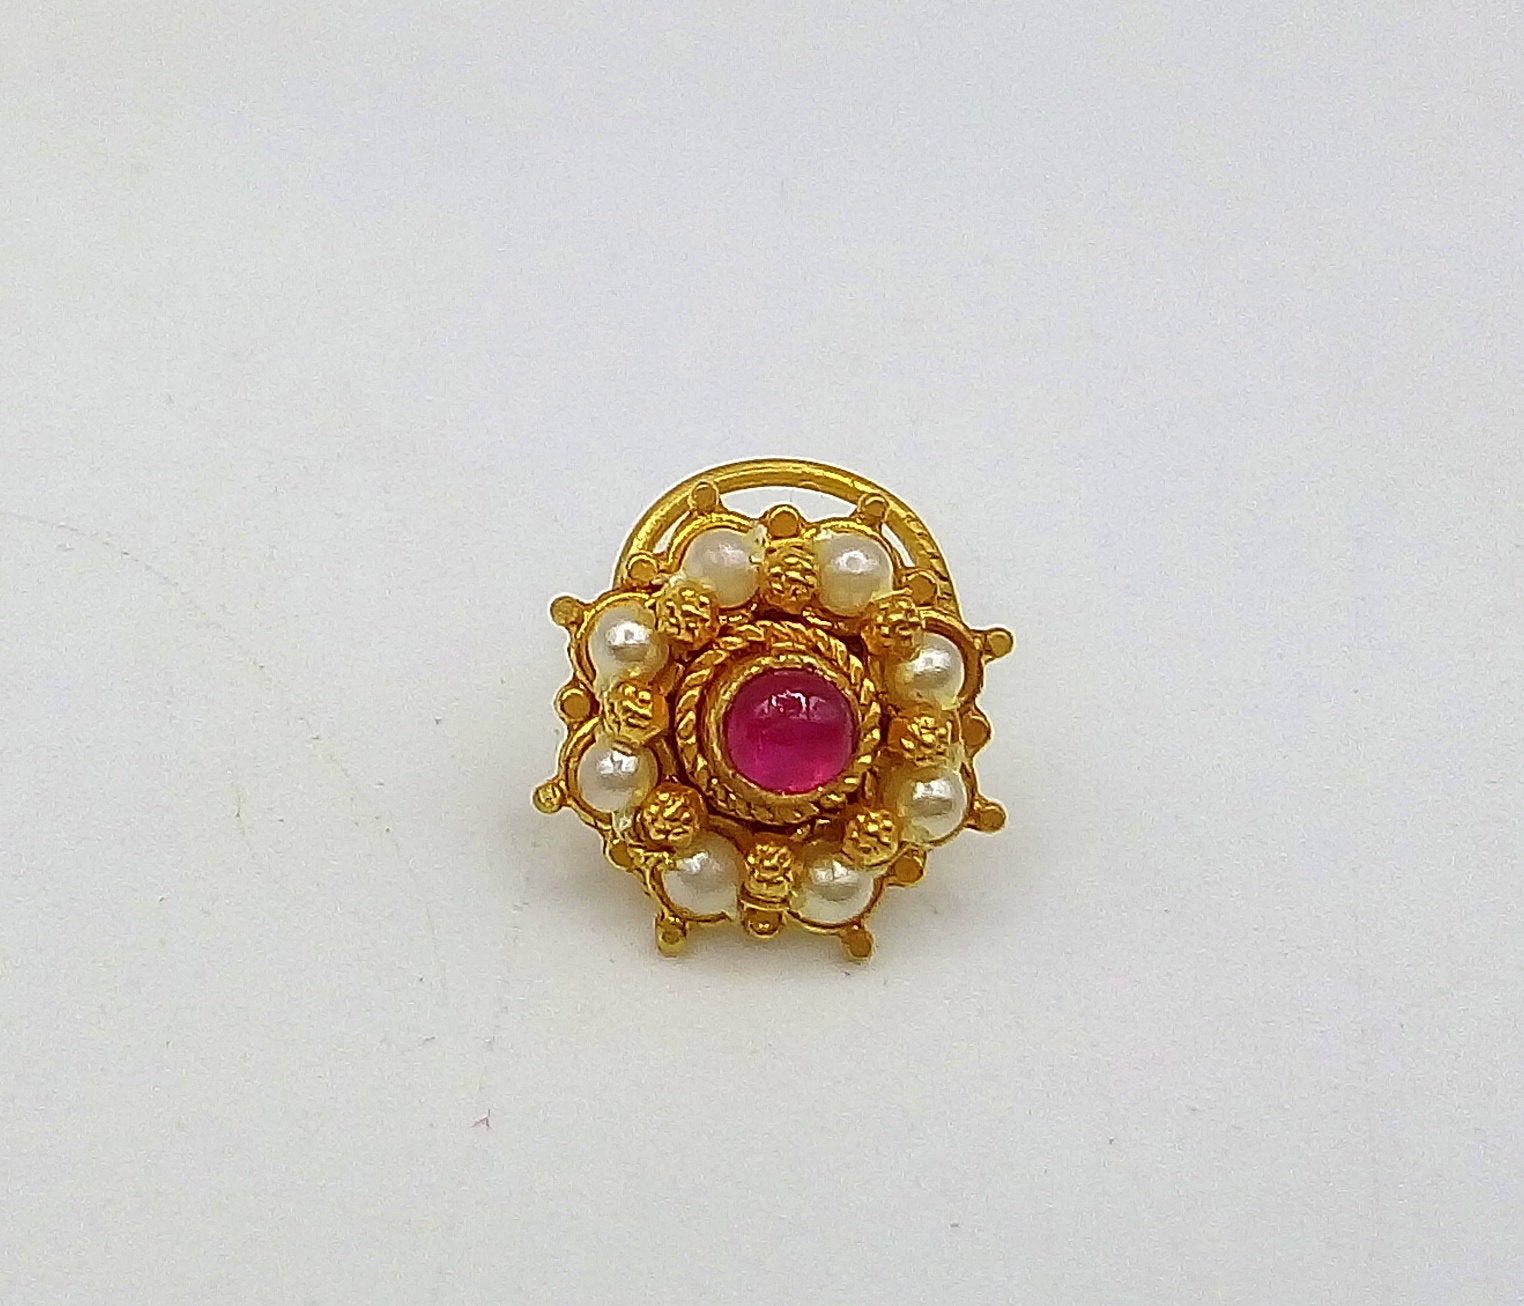 20k yellow gold handmade fabulous red stone pearl nose pin excellent antique vintage design tribal jewelry gnp21 - TRIBAL ORNAMENTS